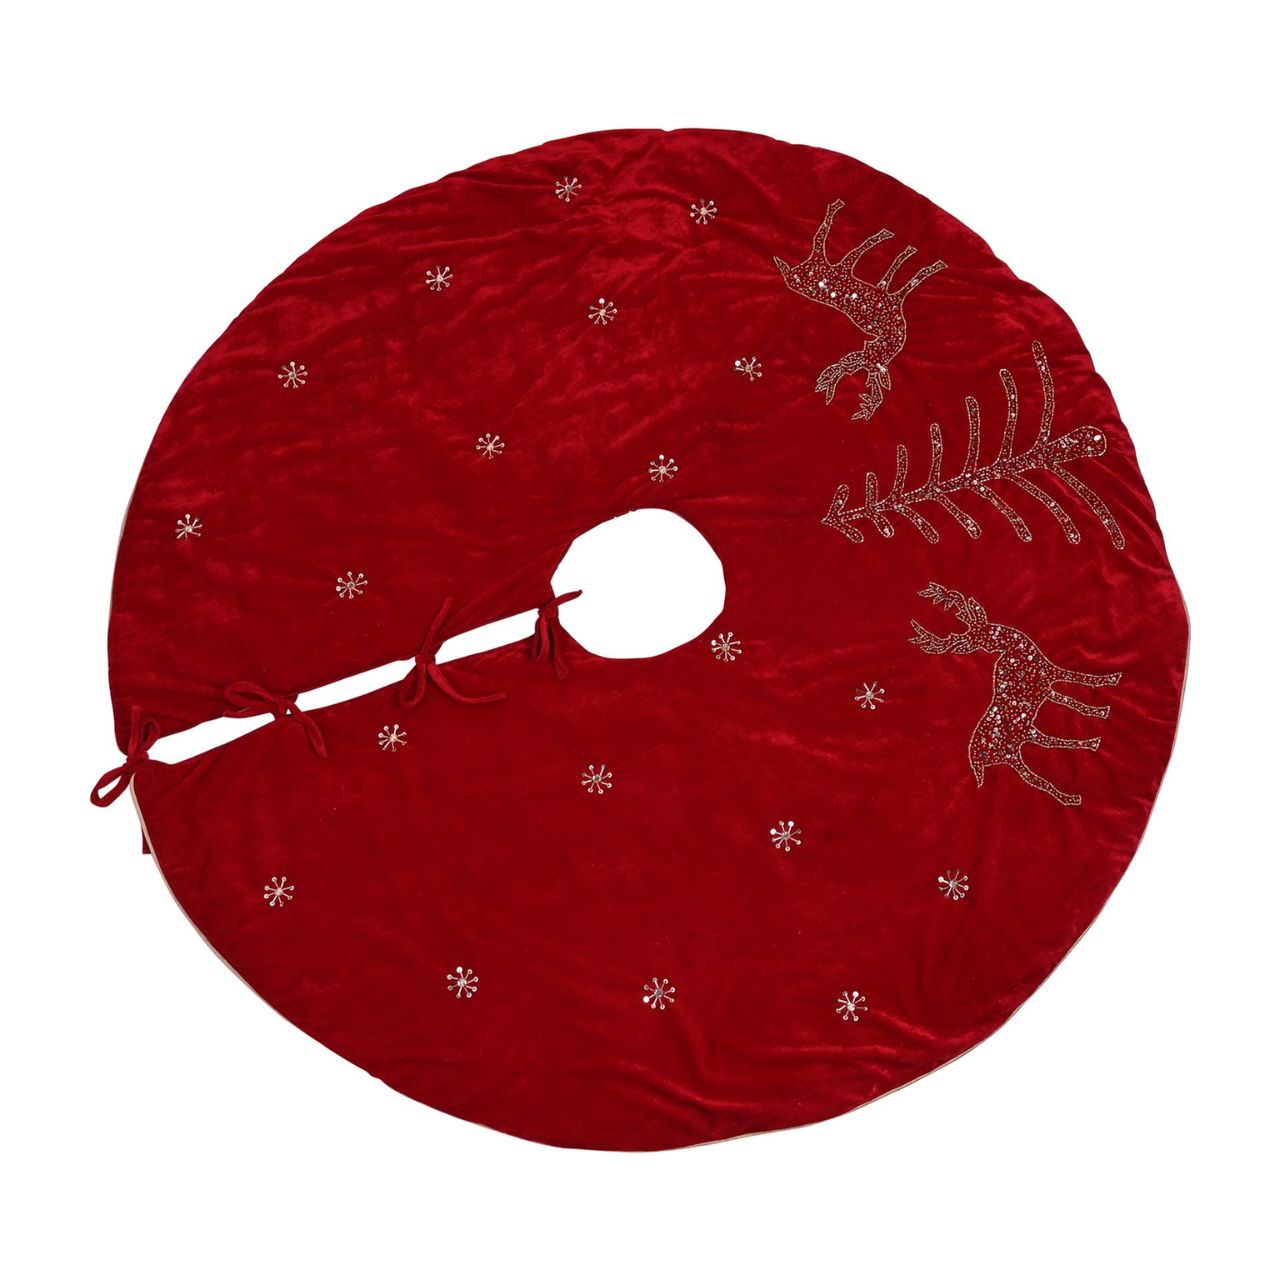 Hand Embellished Luxury Red Christmas Tree Skirt  A hand embellished luxury red tree skirt.  This standout accessory wraps itself around Christmas trees to accentuate its decoration.